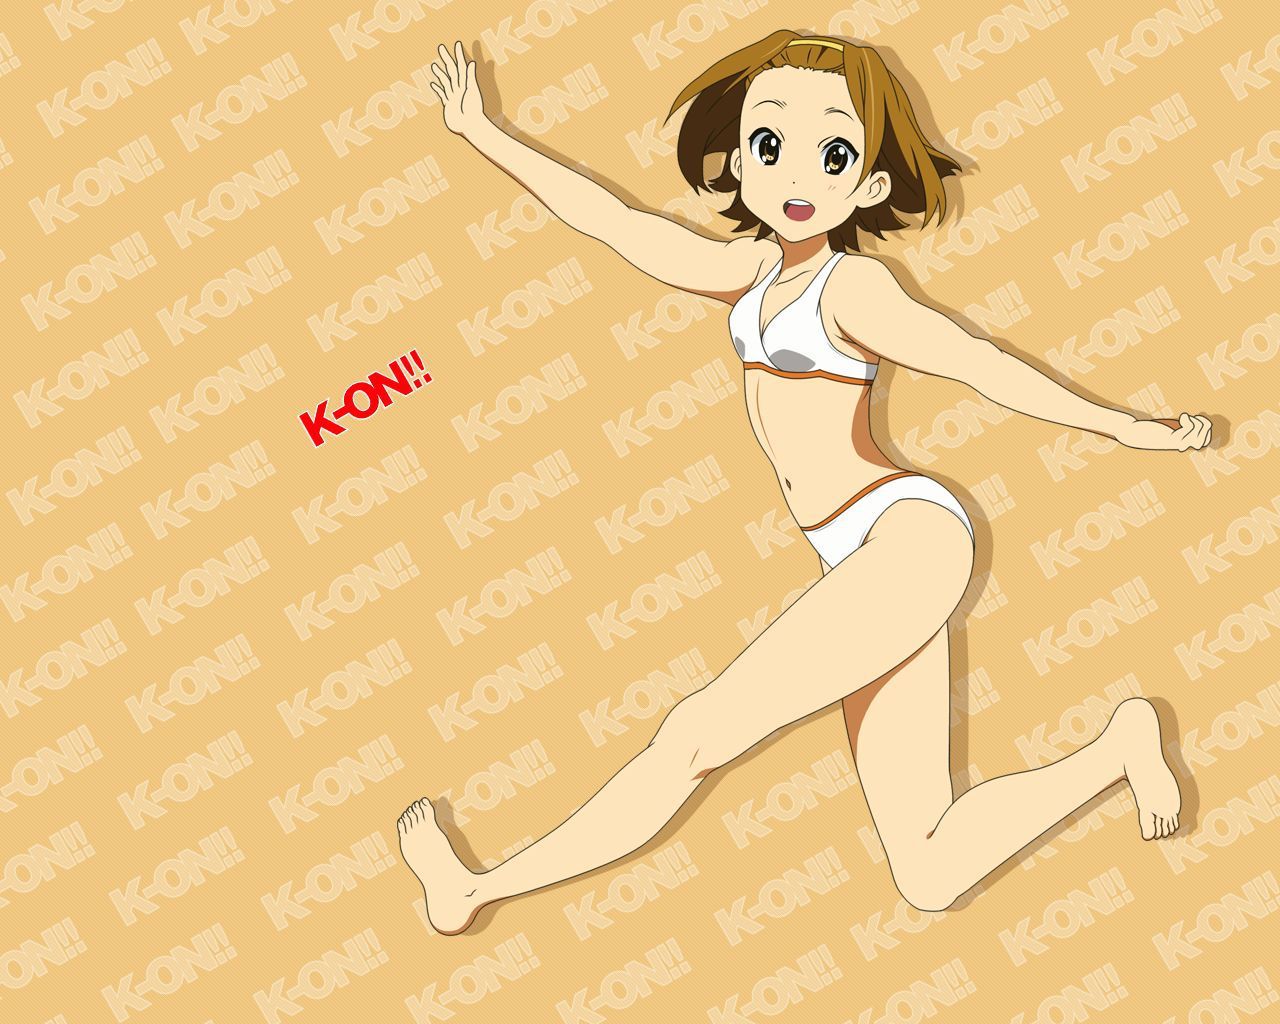 [k-On!] ] The music part heroine such as Yui-chan collection Photoshop summary part2 18